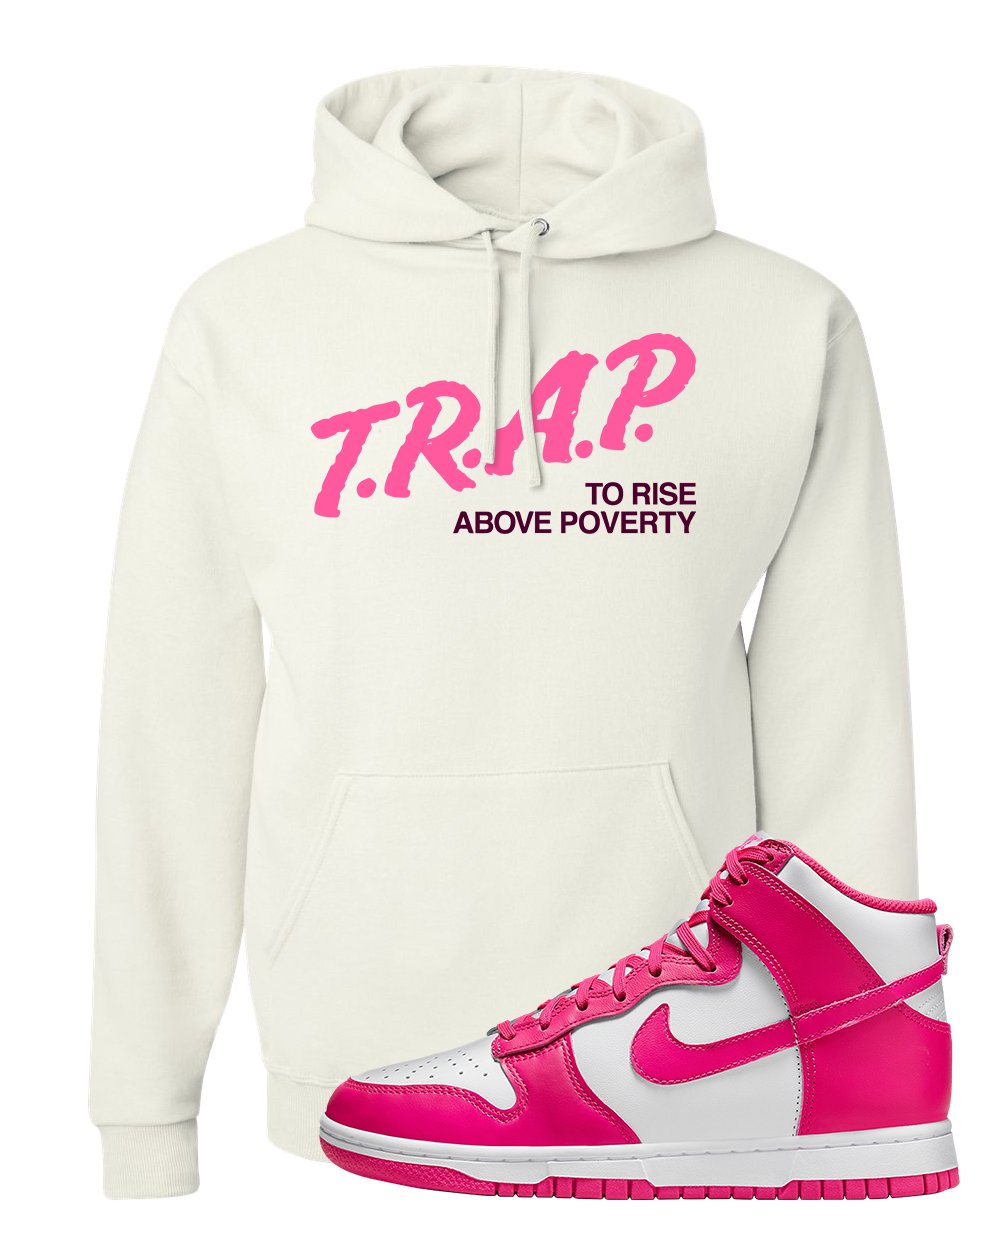 Pink Prime High Dunks Hoodie | Trap To Rise Above Poverty, White